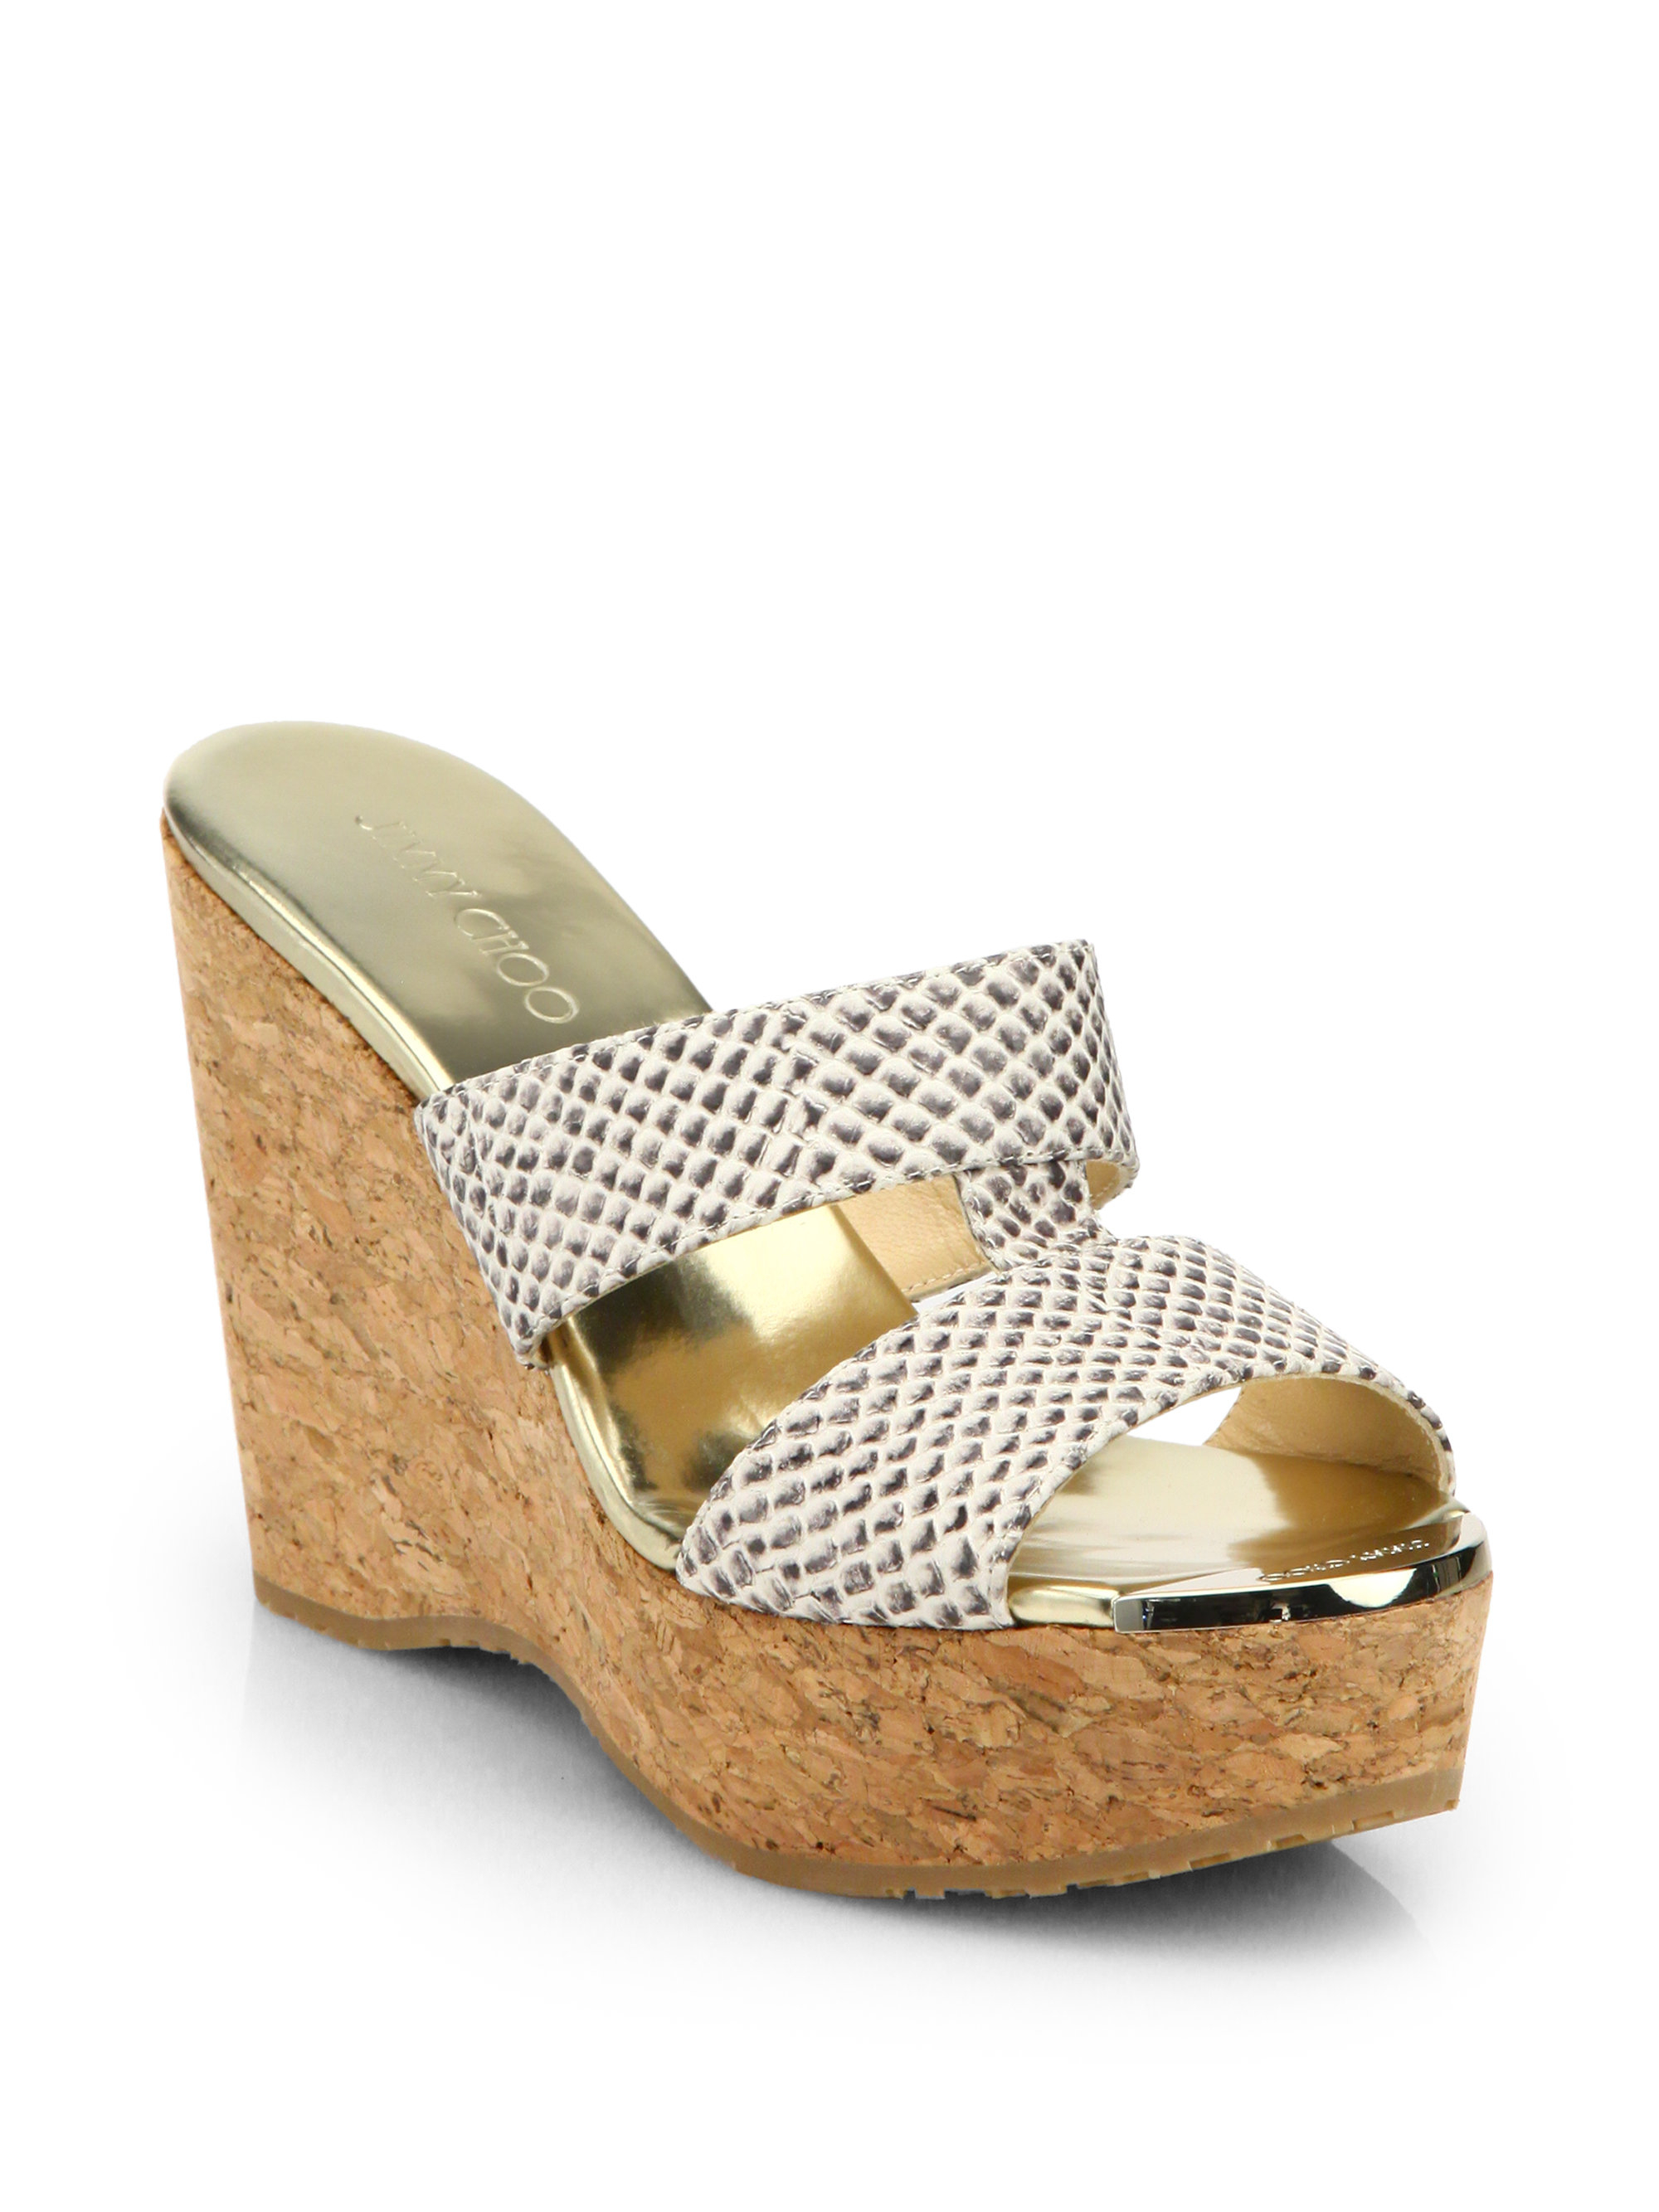 Jimmy Choo Porter Spotted Leather Cork Wedge Sandals in Natural - Lyst